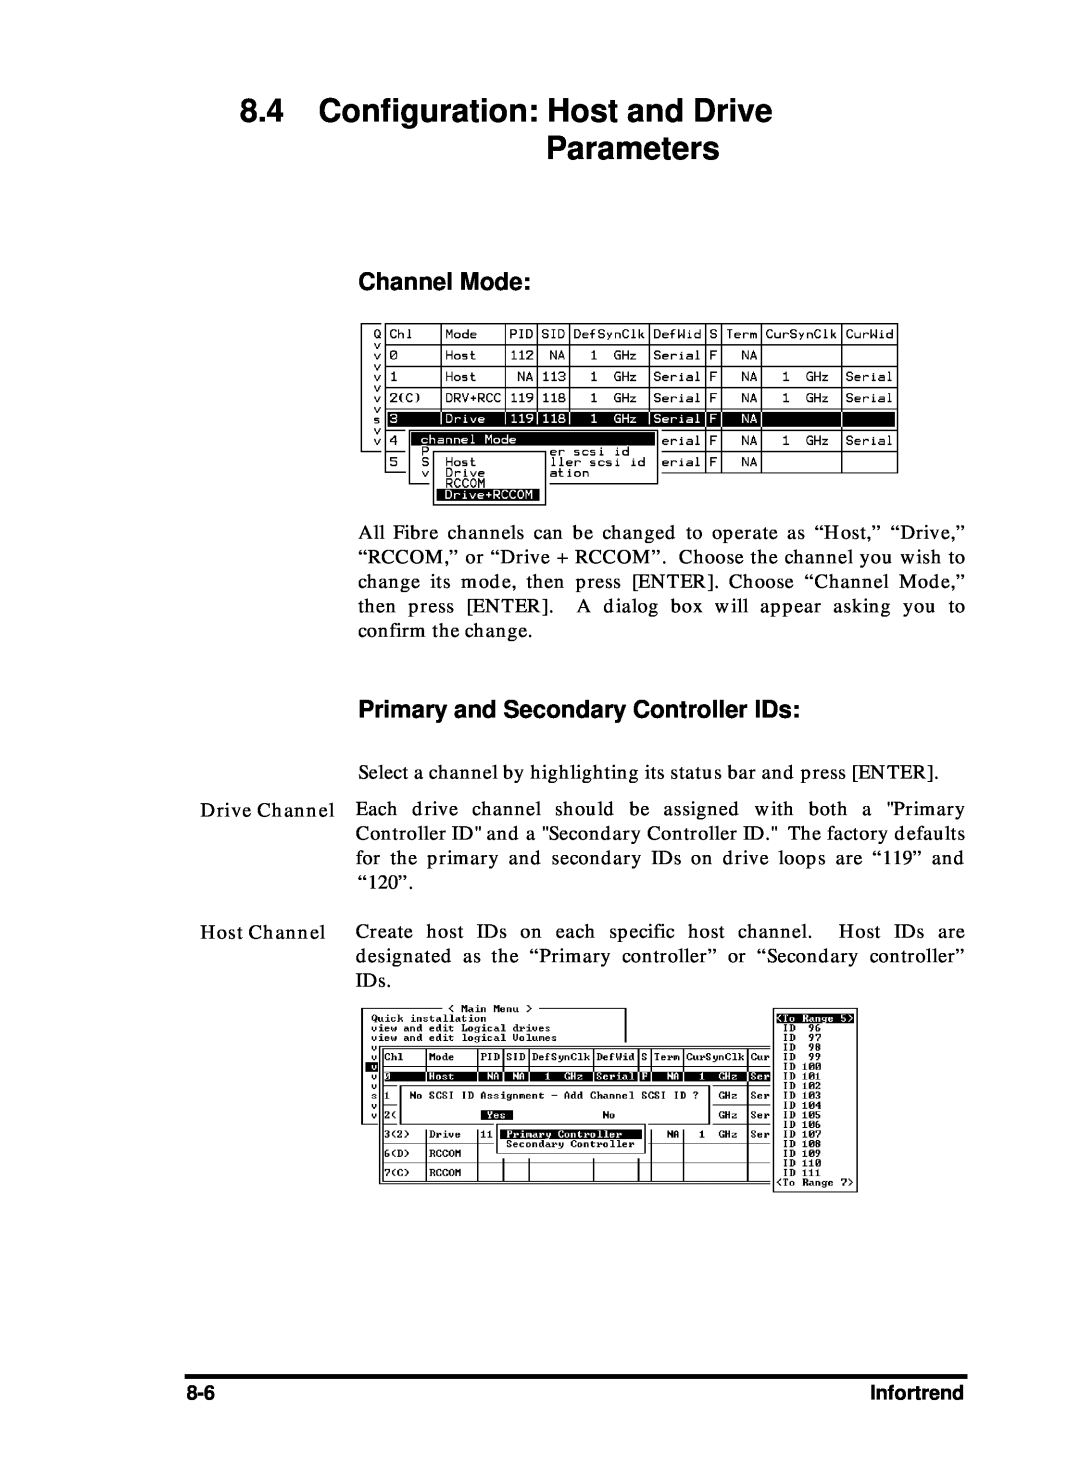 Compaq Infortrend manual Configuration Host and Drive Parameters, Channel Mode, Primary and Secondary Controller IDs 